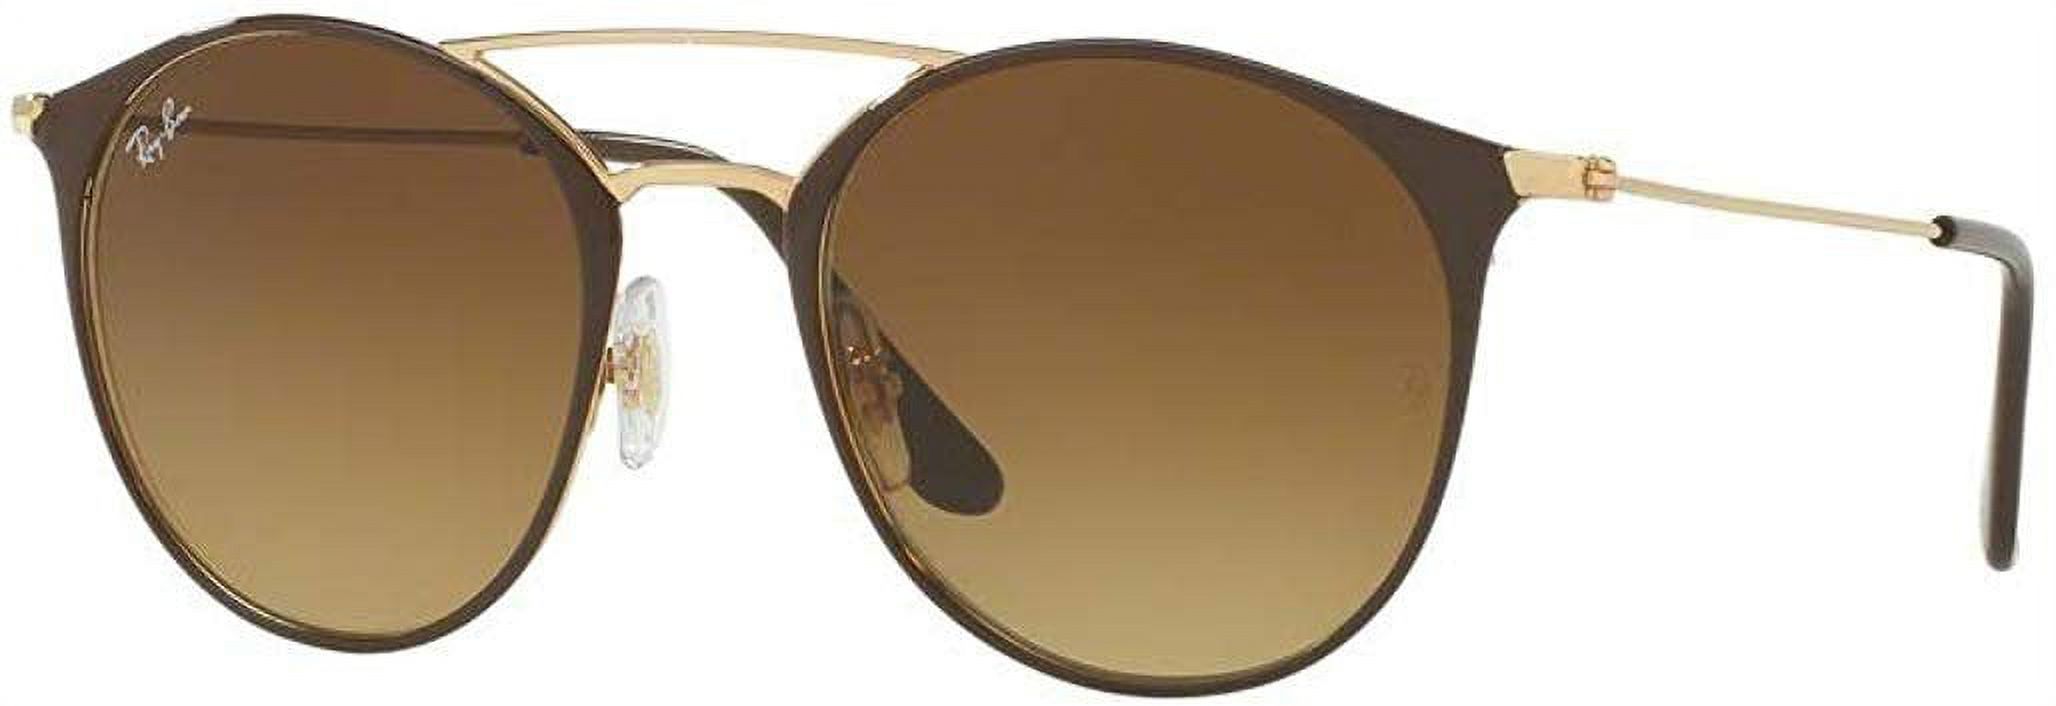 Ray-Ban RB3546 900985 49M Gold Top Brown/Brown Gradient Sunglasses For Men For Women - image 1 of 5